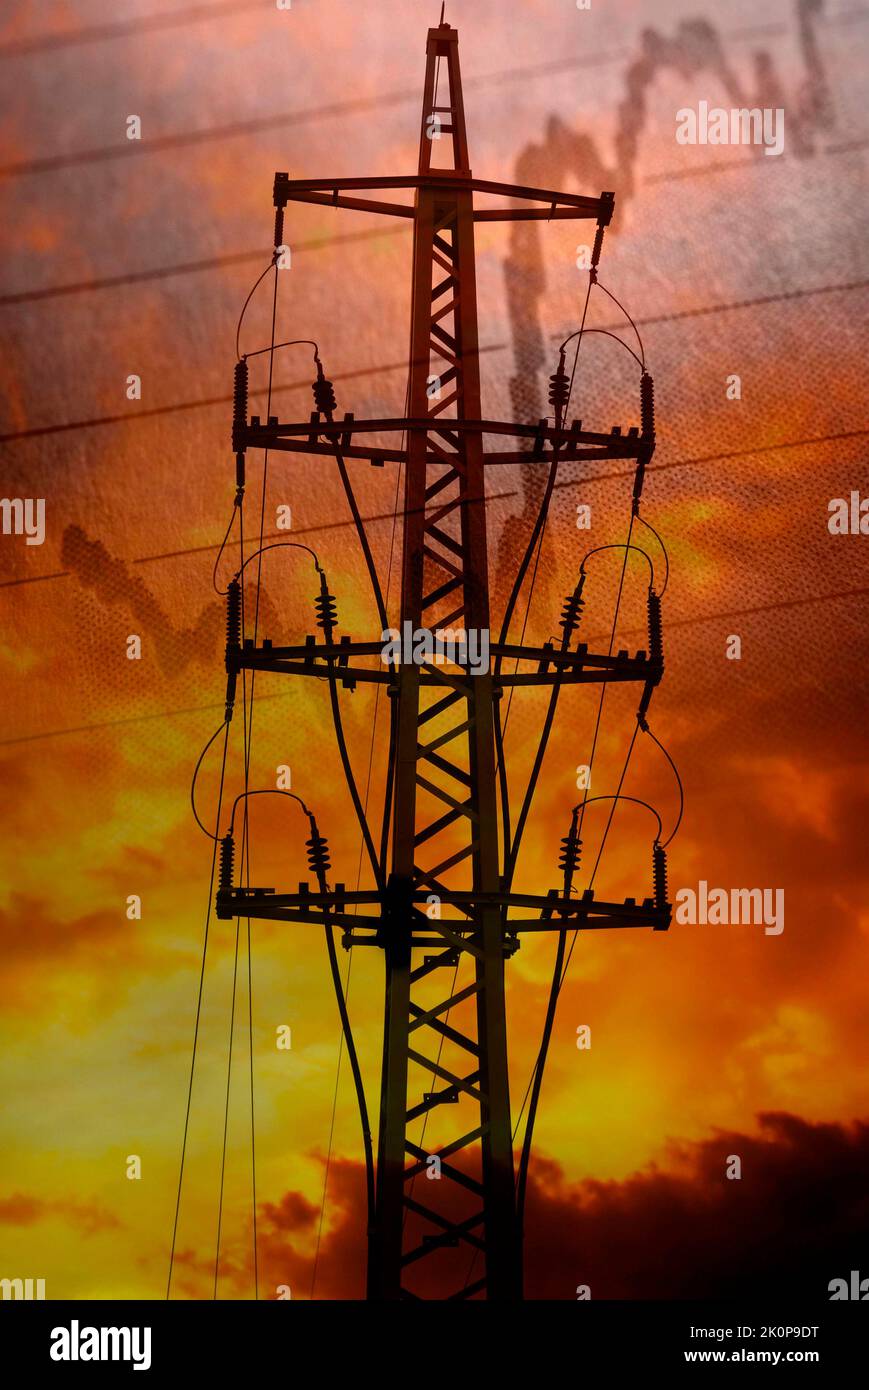 electricity tower with dramatic sky and market indicator, concept for energy crisis Stock Photo